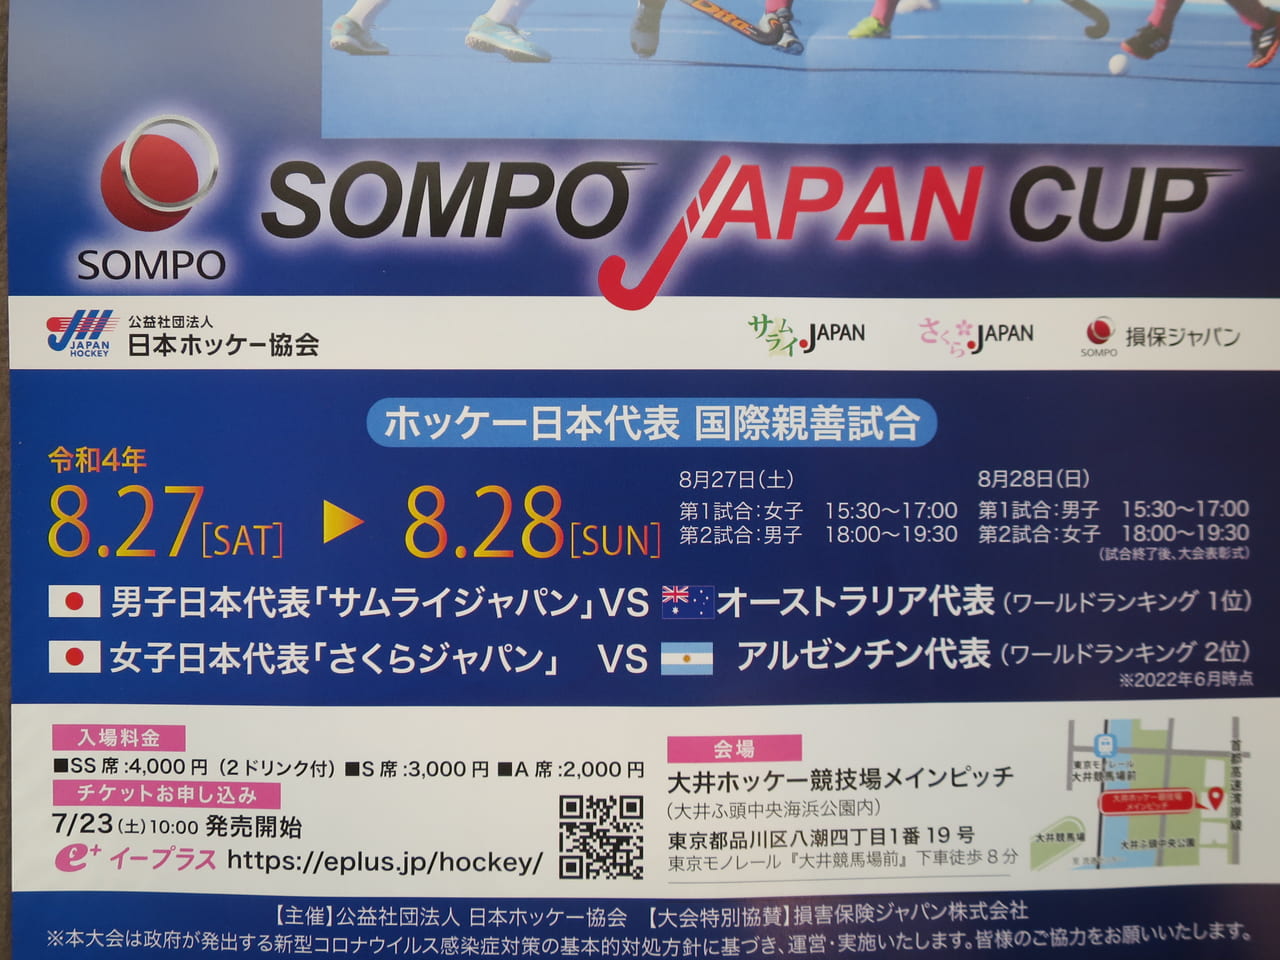 SOMPO JAPAN CUP 2022